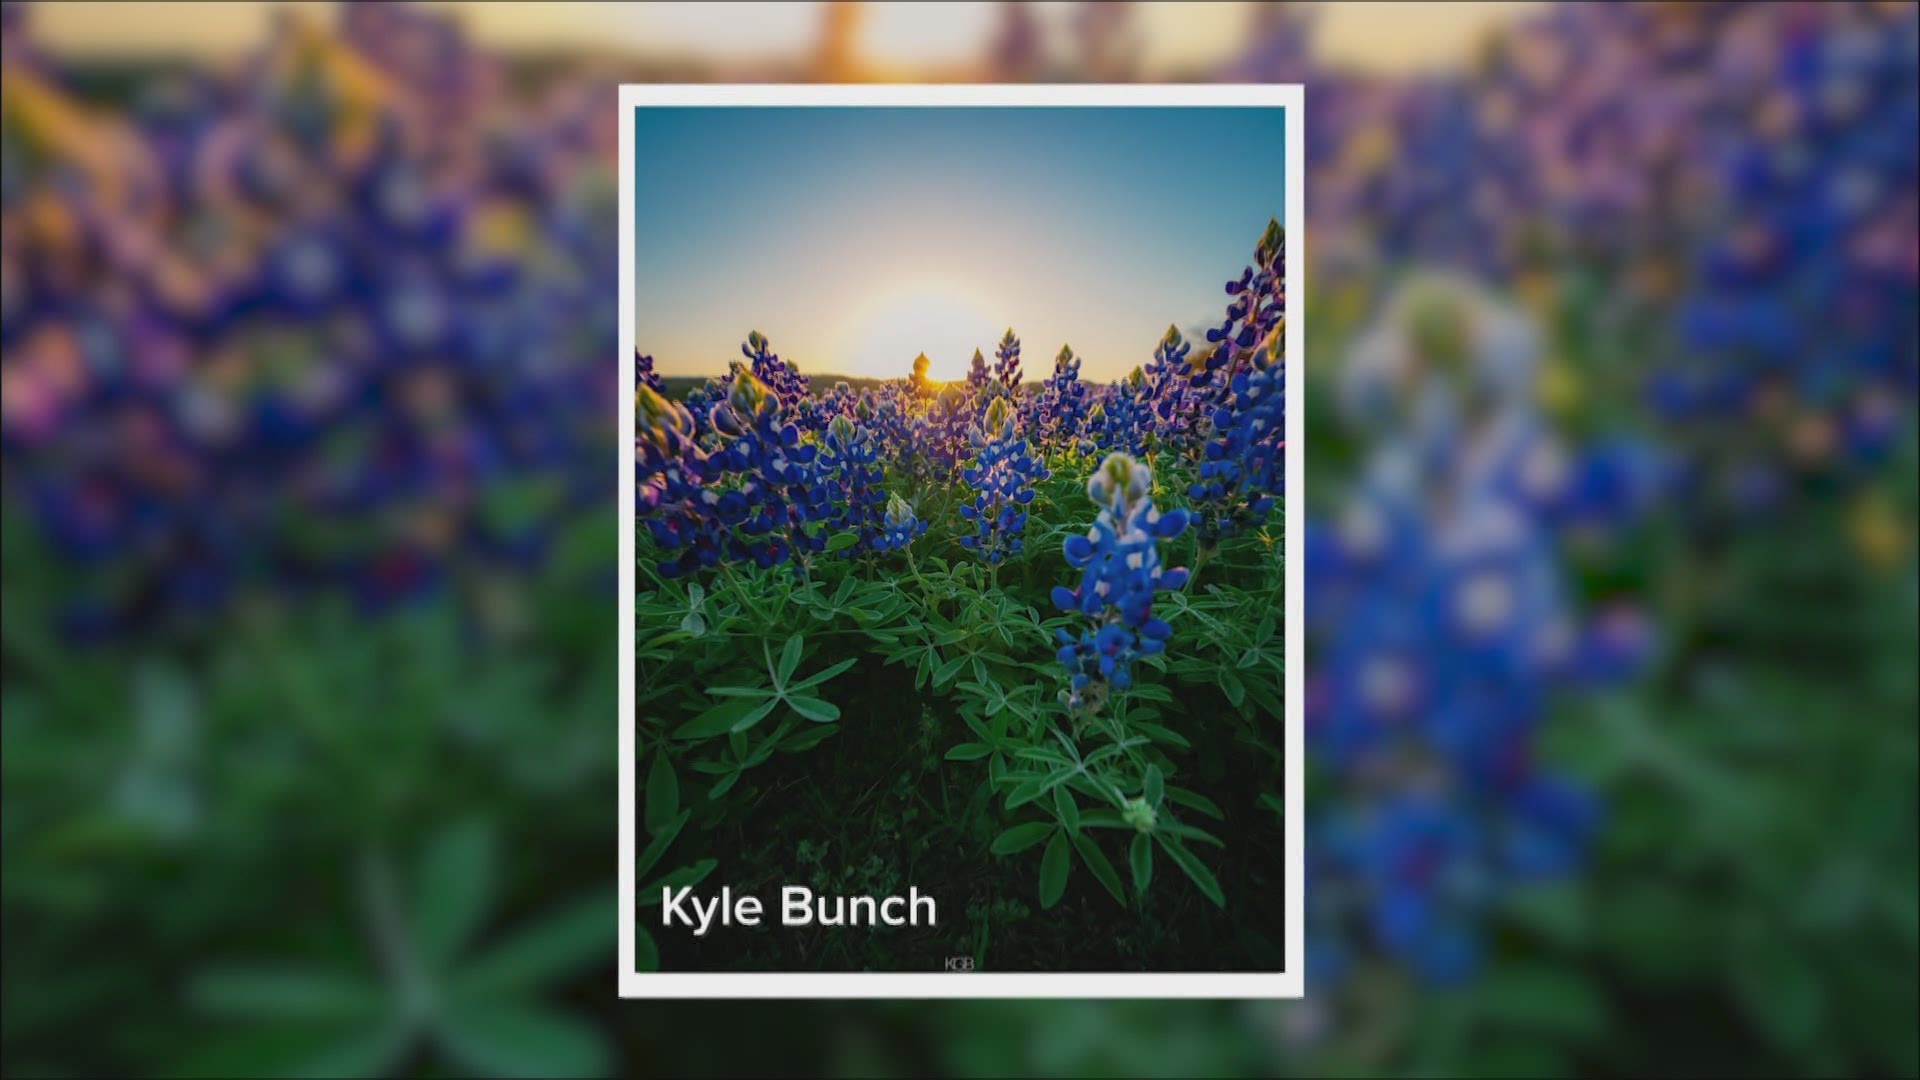 WFAA's Marc Istook gathered up some of the best images showcasing the Texas spirit, all displayed around a symbol of spring in the state: bluebonnets.